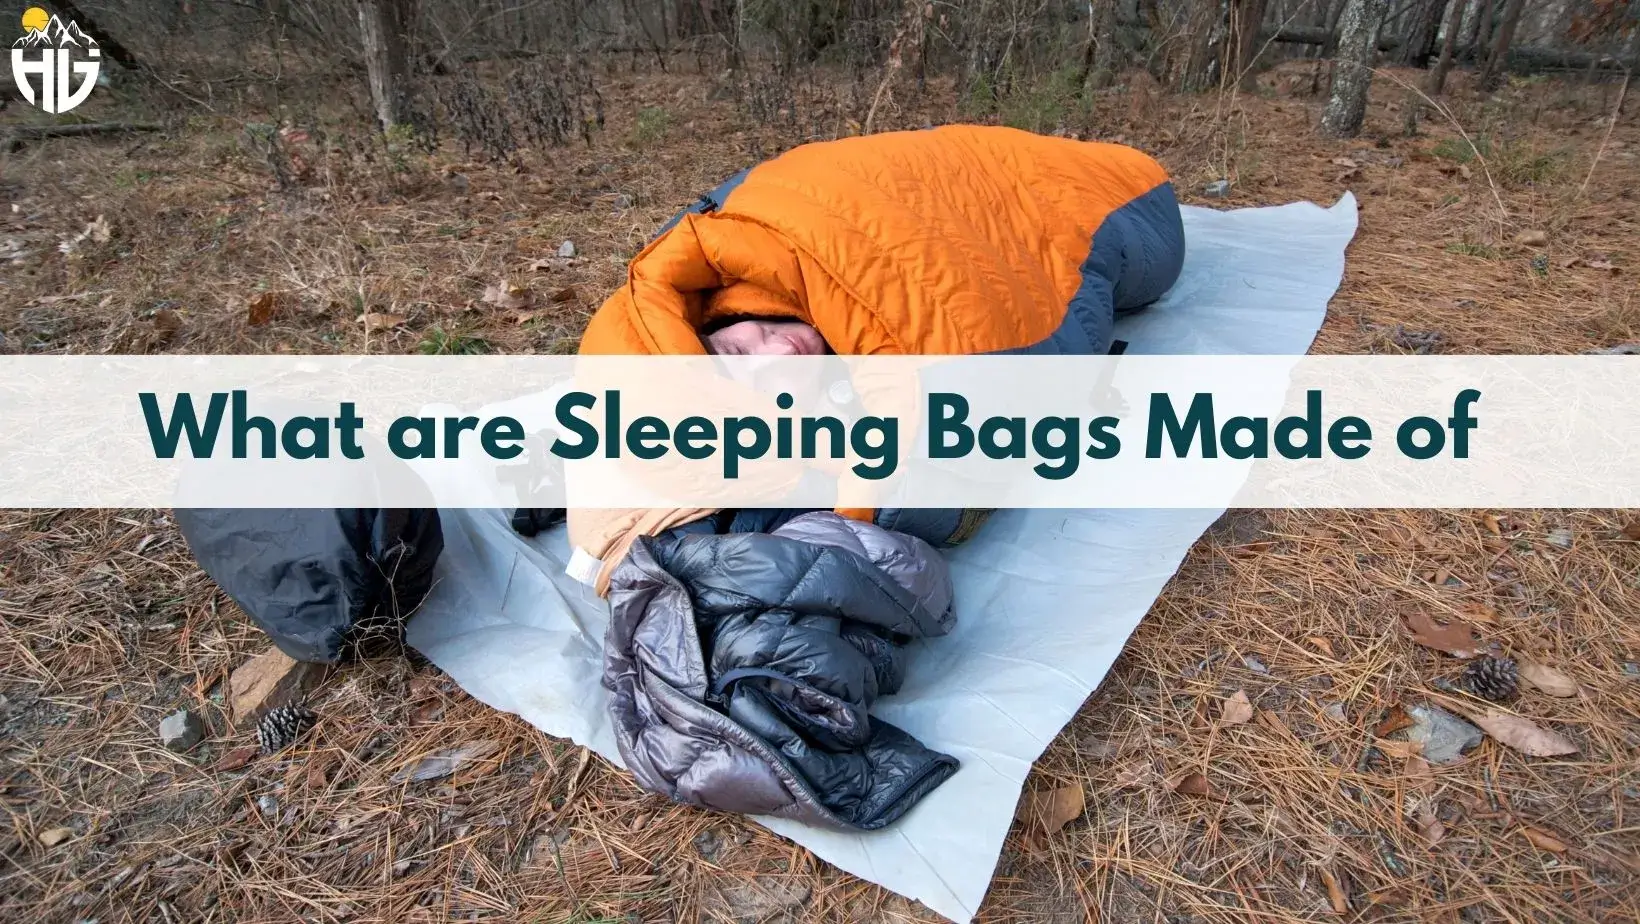 What are Sleeping Bags Made of